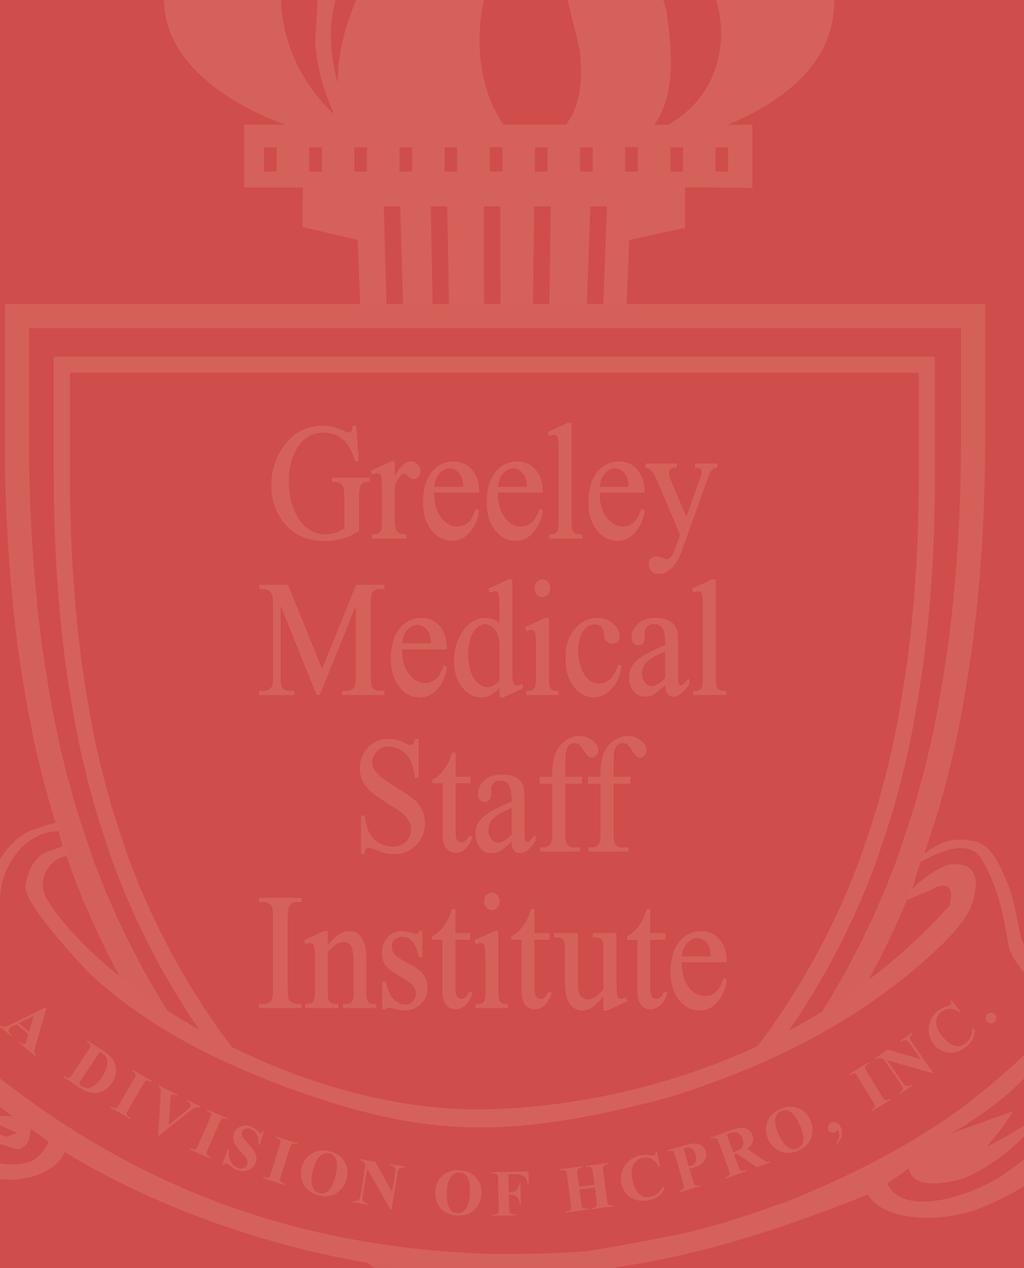 Greeley Medical Staff Institute presents a 60-minute audioconference Good Fences Make Good Neighbors: Understanding the roles and responsibilities of the